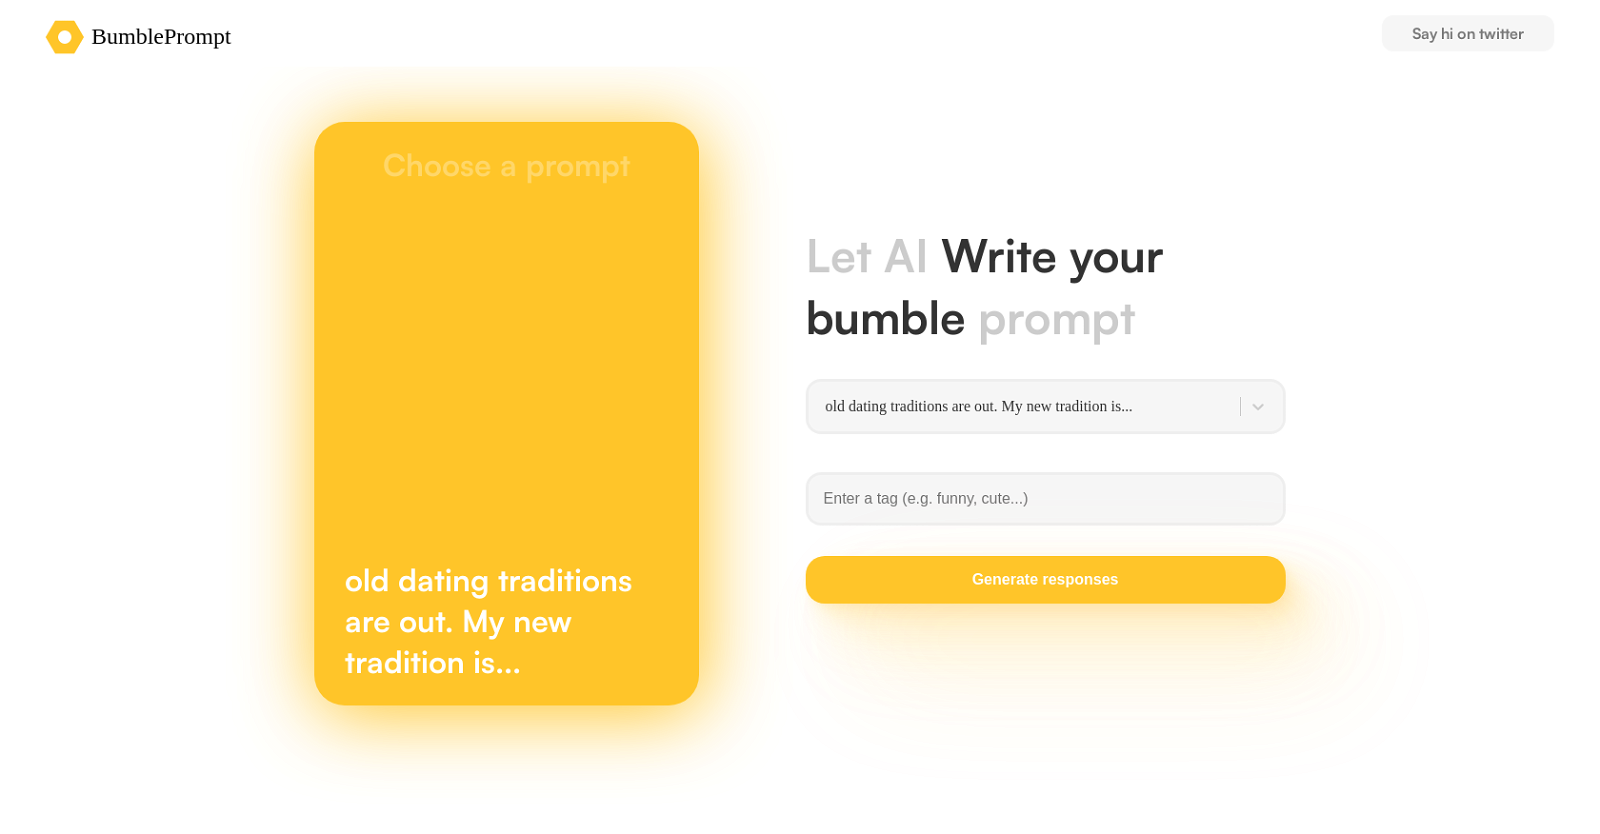 Bumble prompts